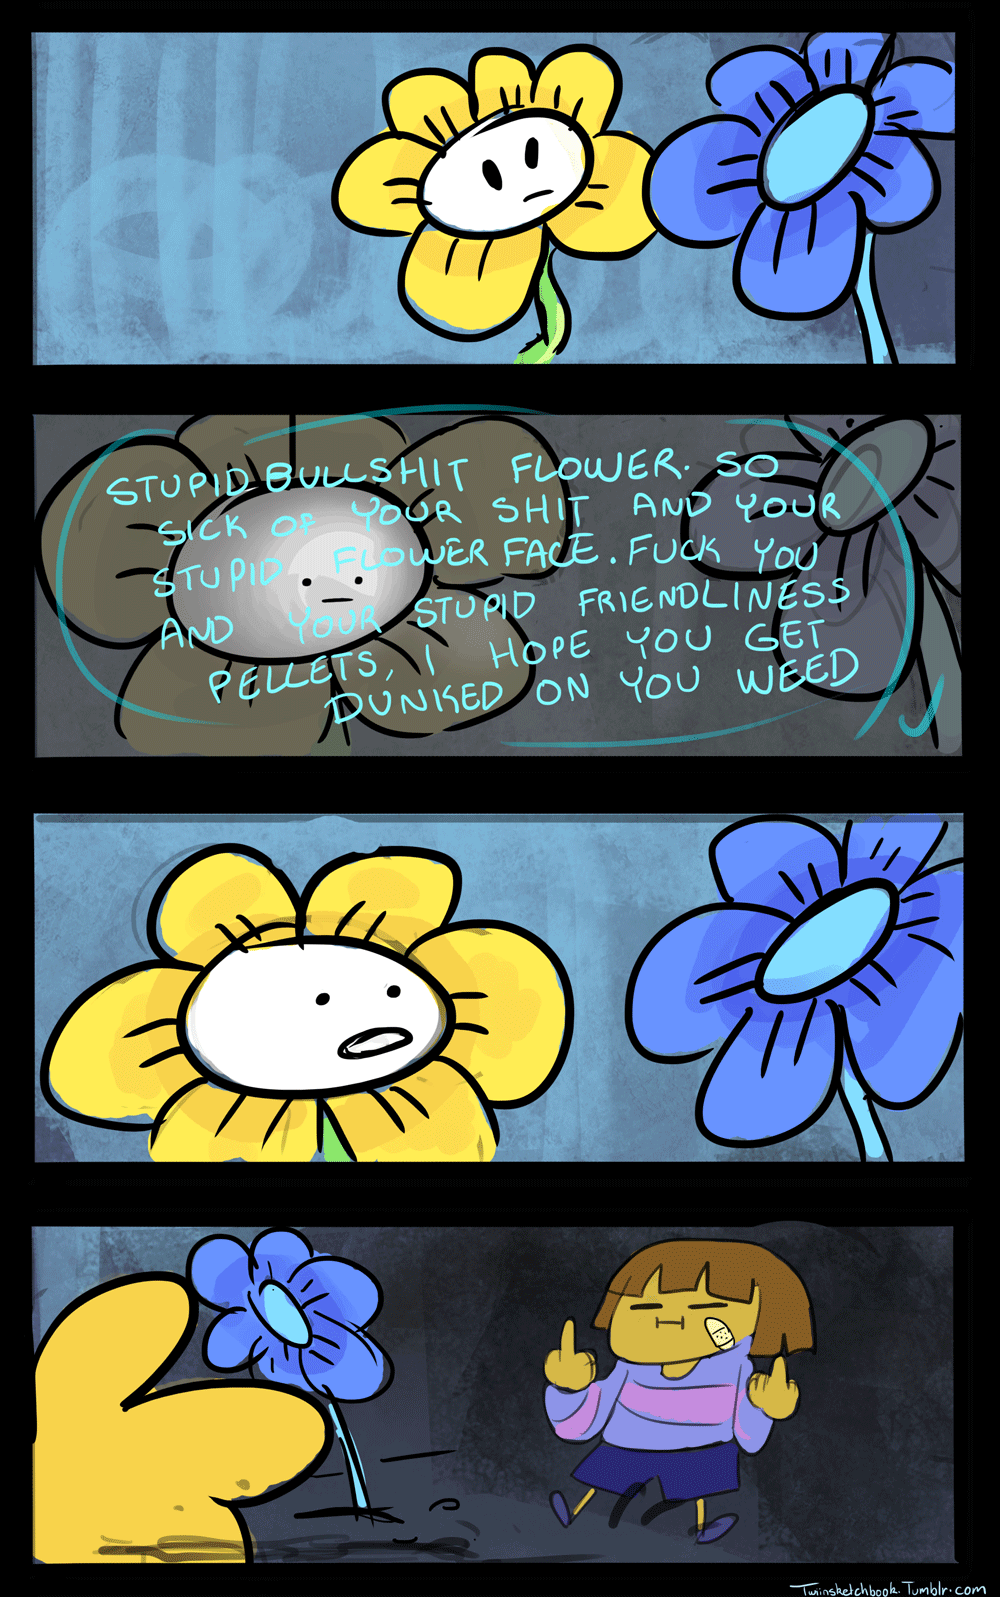 undertale themes tumblr utter nonsense sorry late and and so I Complete Its â€¢ am